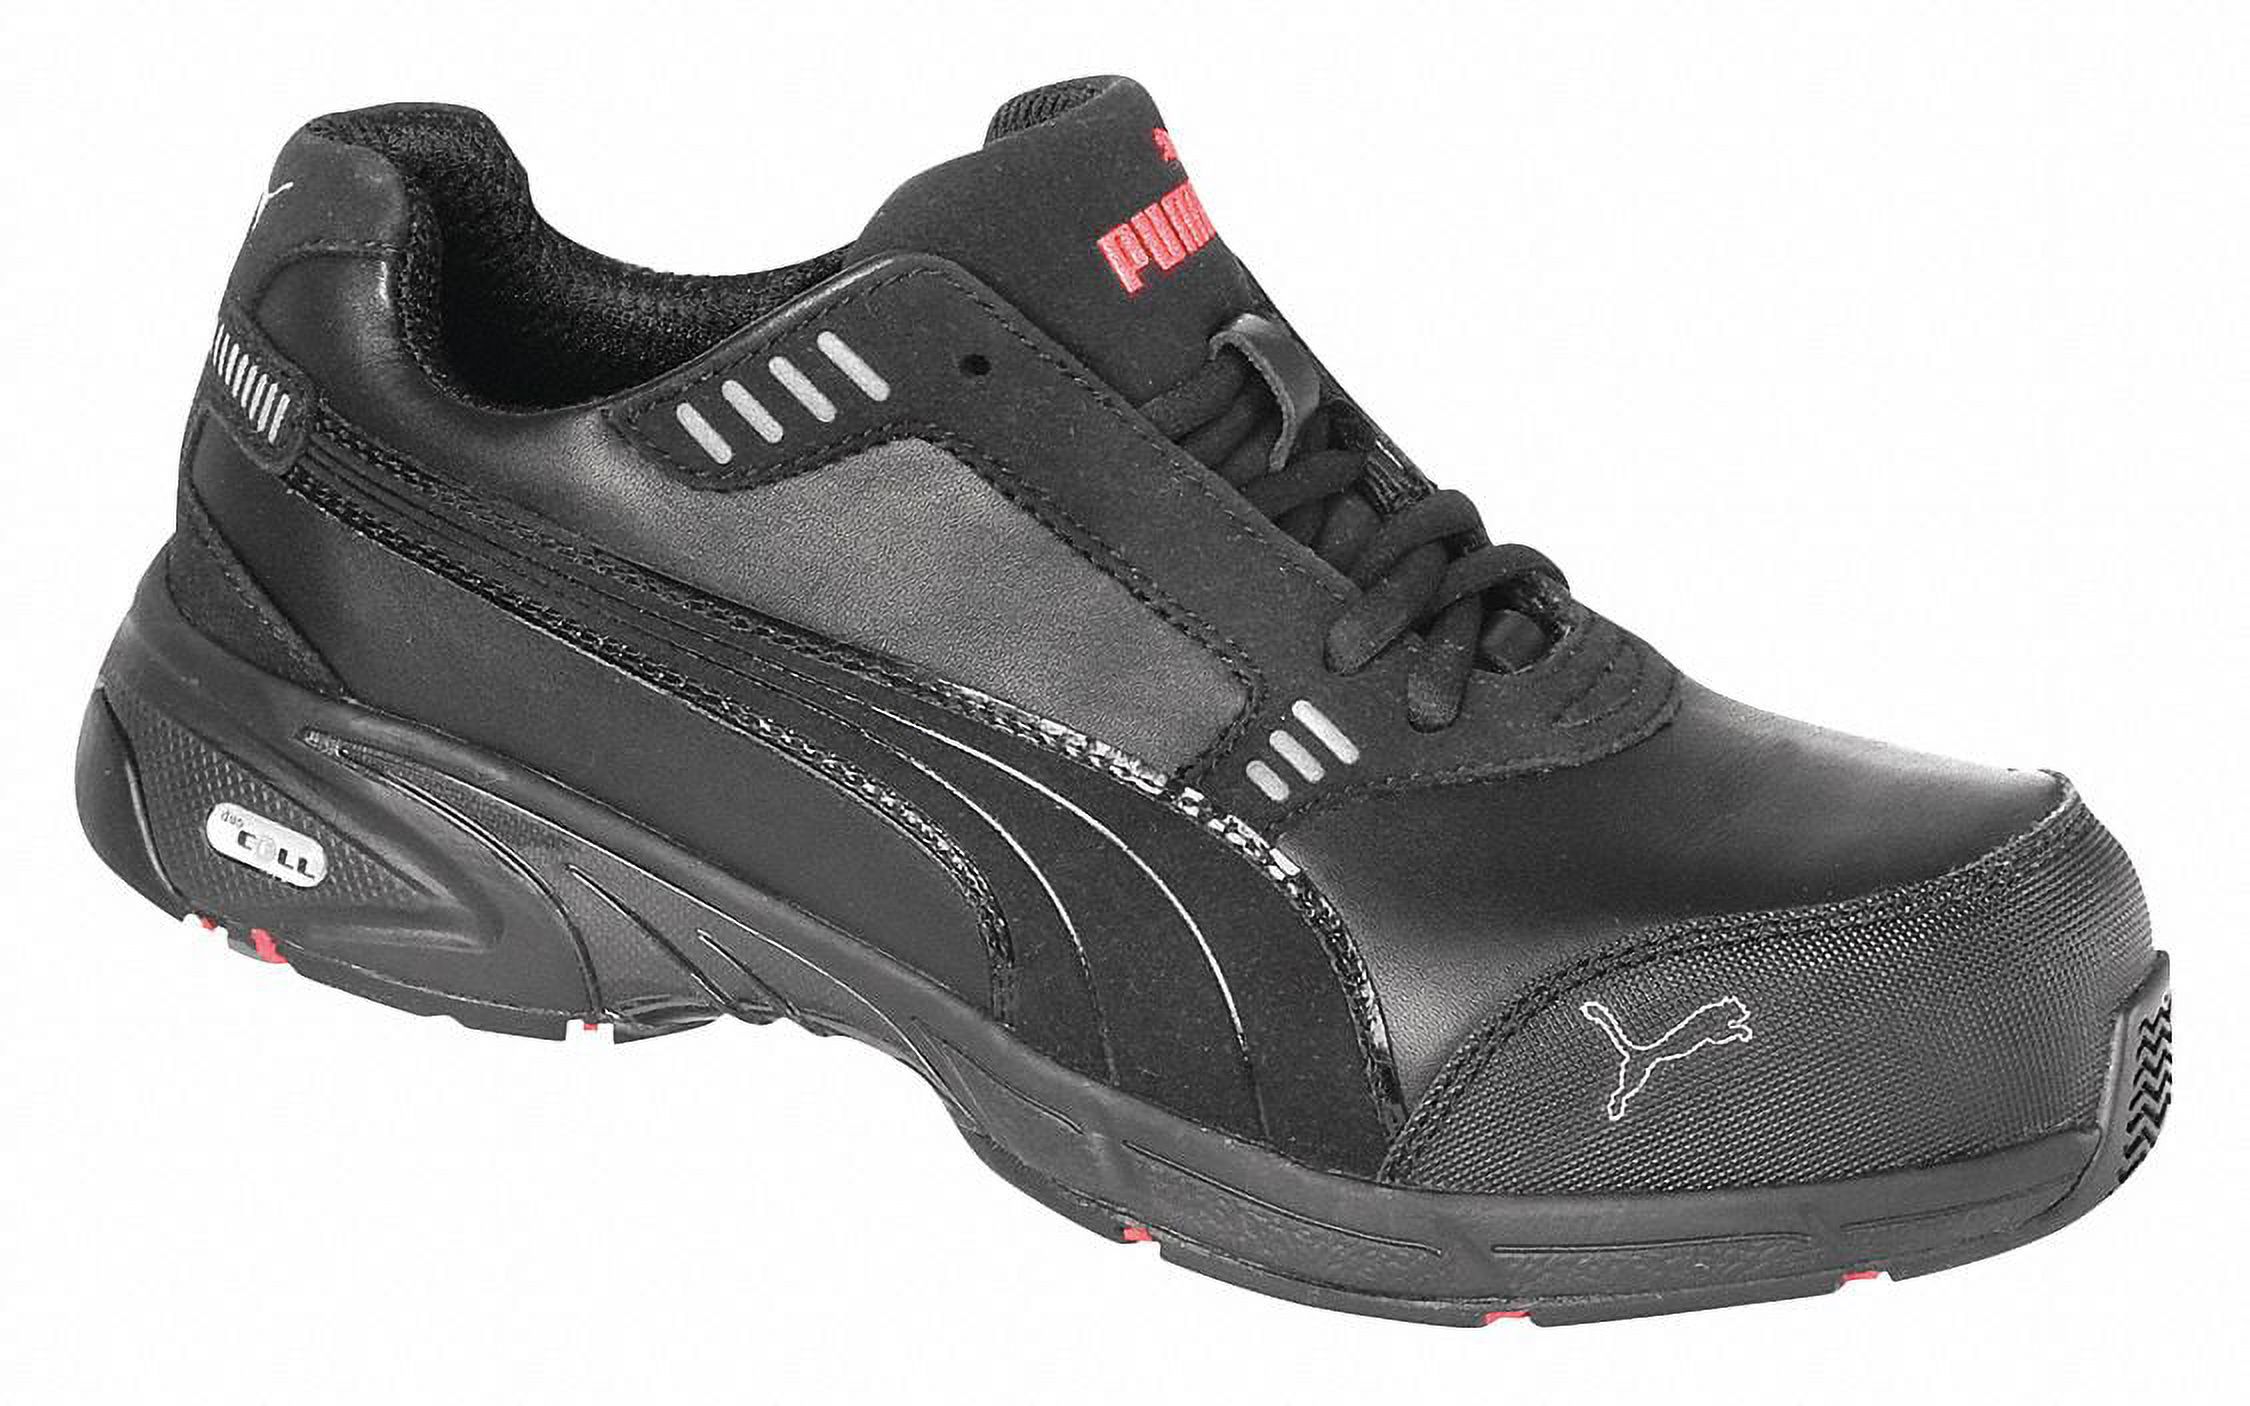 Puma Safety Shoes Athletic Work Shoes 7 Black   642575-07 - image 1 of 2